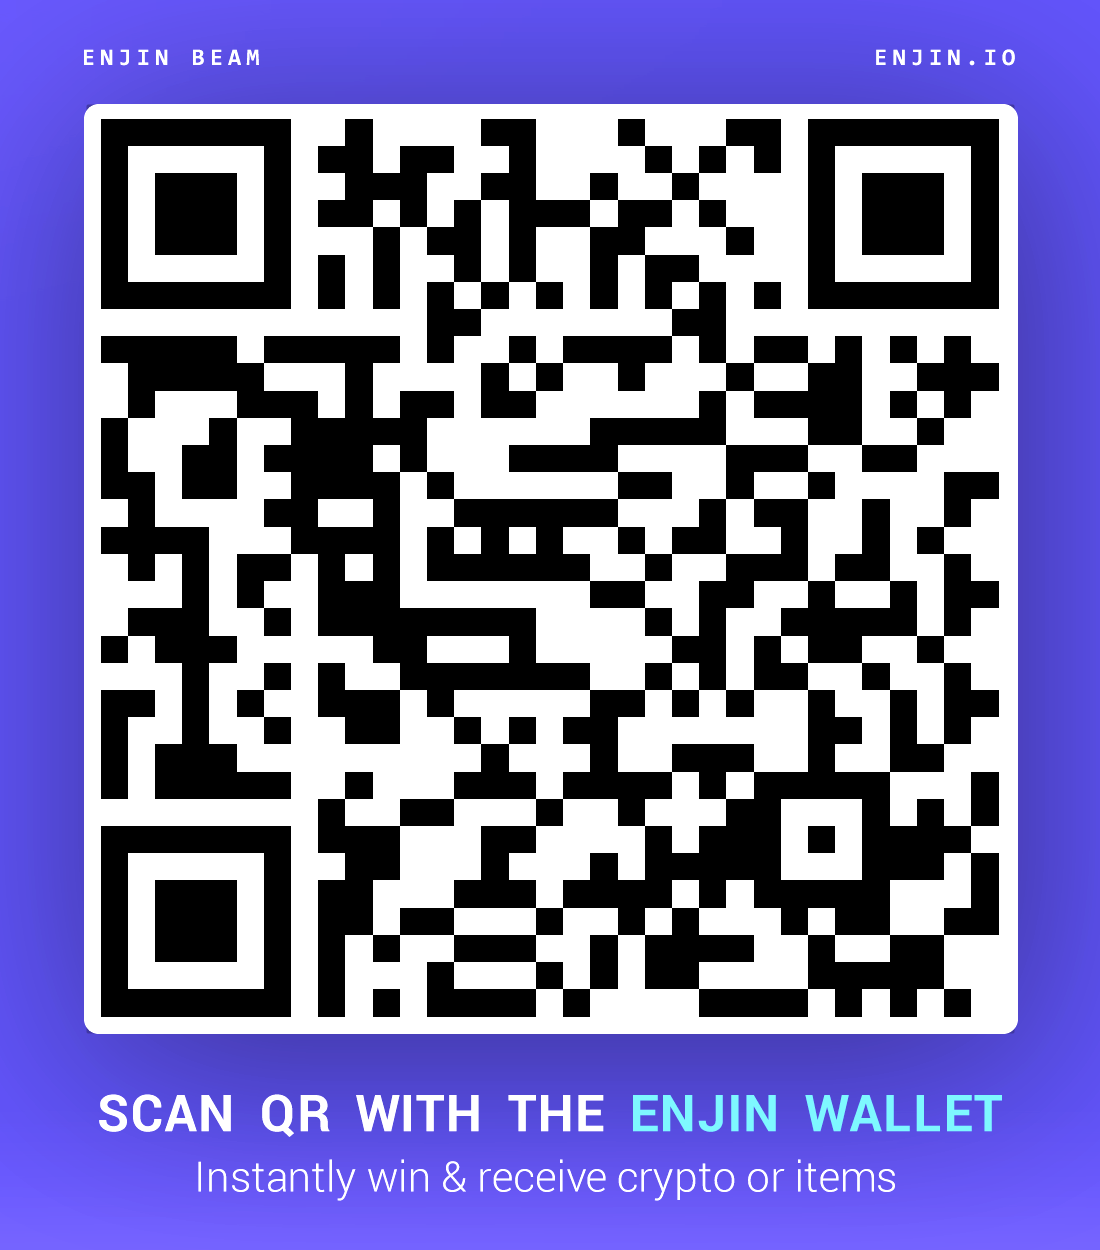 Enjin Beam: The Fastest Way to Receive Cryptocurrencies & Blockchain Items